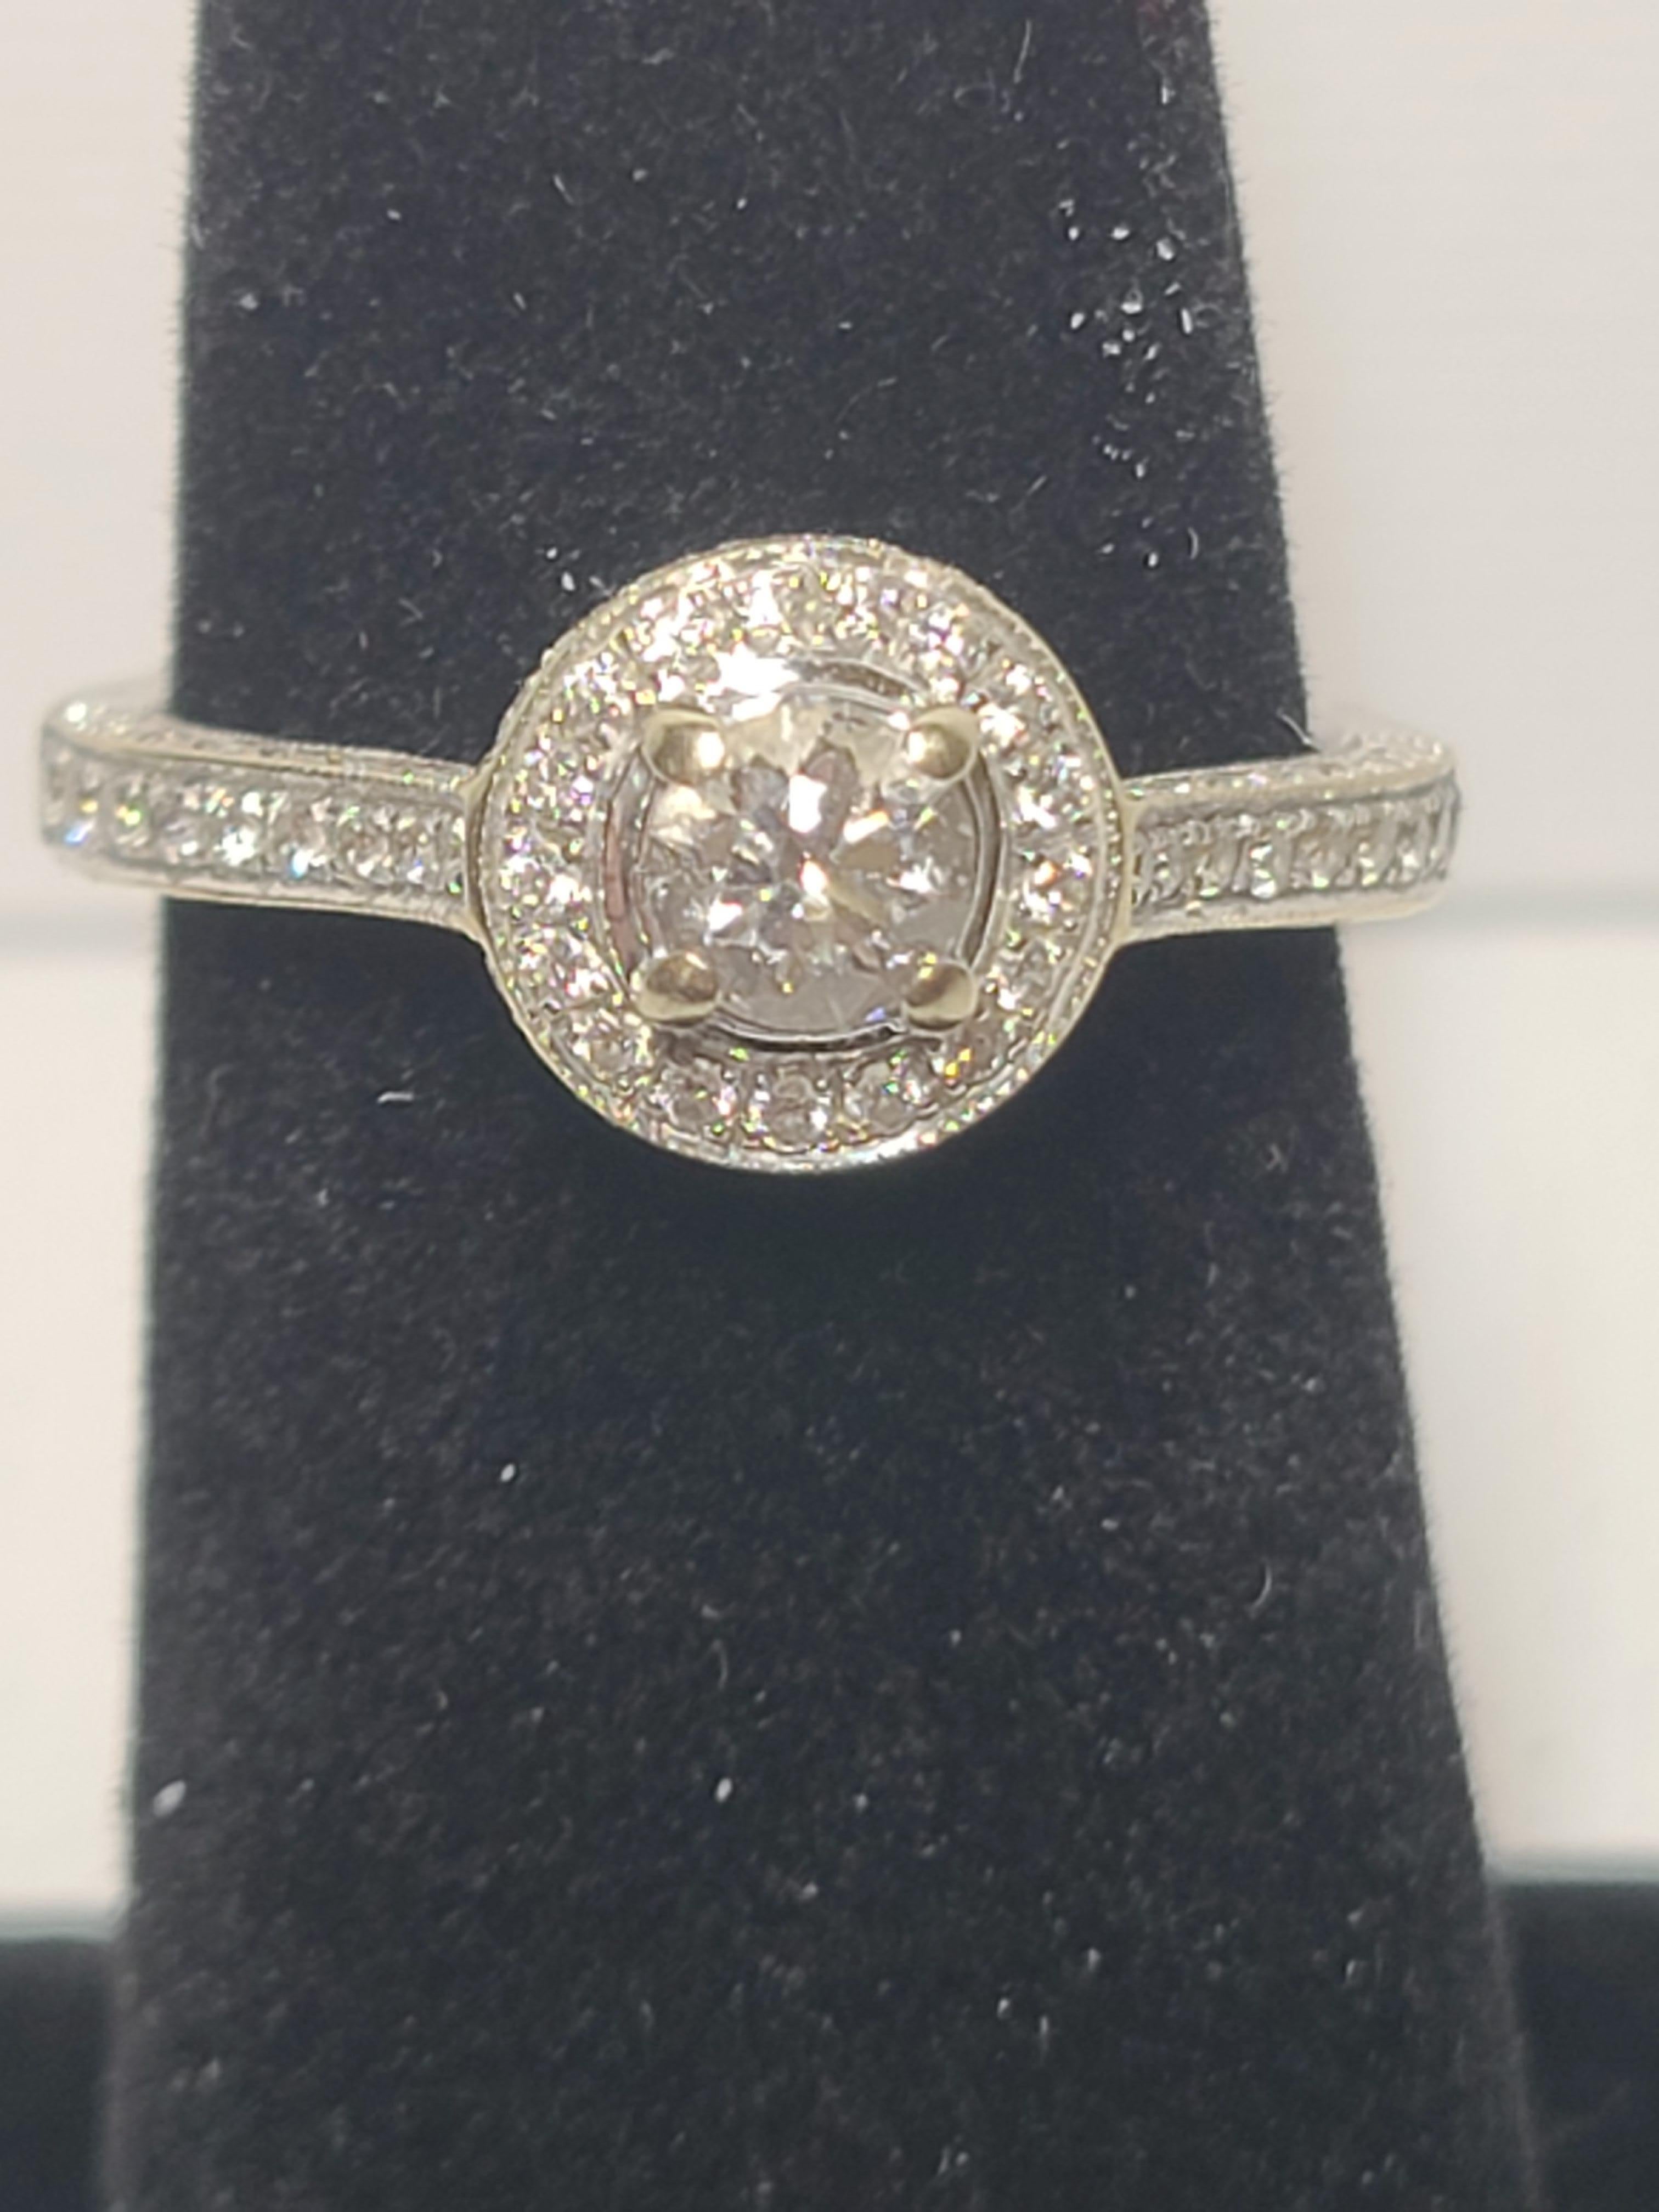 14K white gold diamond halo engagement ring with natural stones. Size 6.5. Total weight of 3.5 grams.